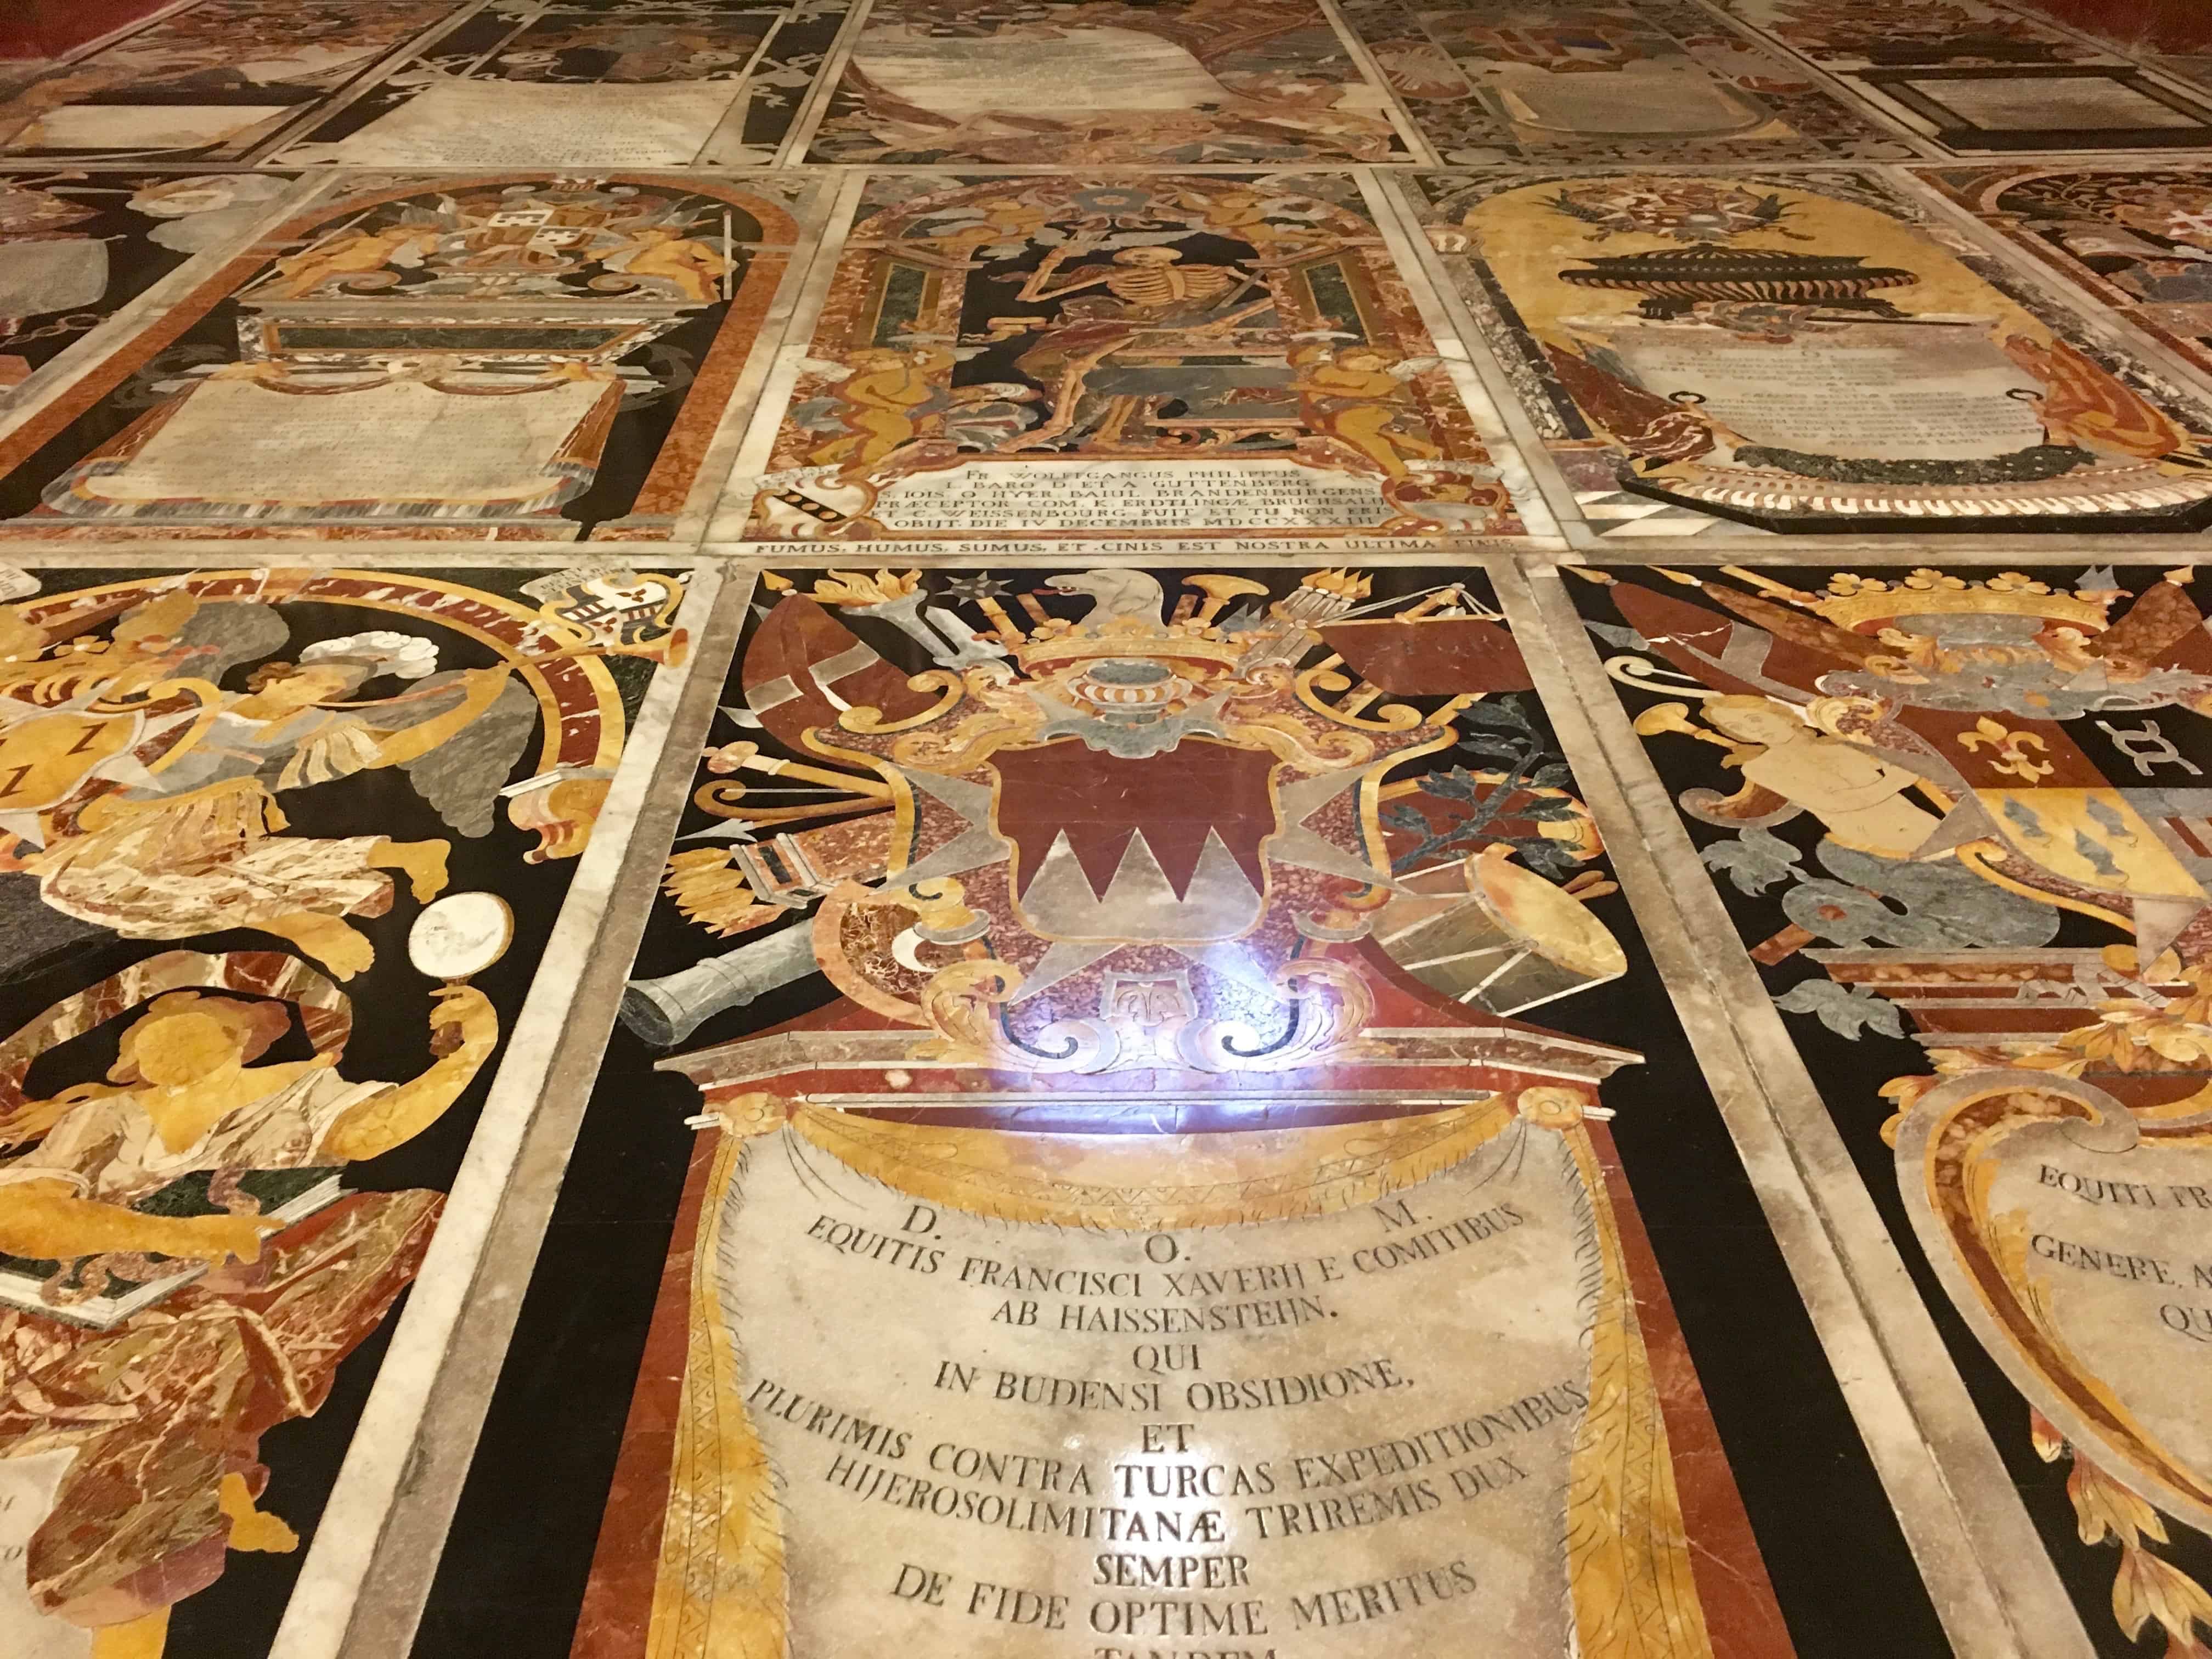 Marble mosaics decorate the entire floor of Saint John's Co-Cathedral in Valetta.